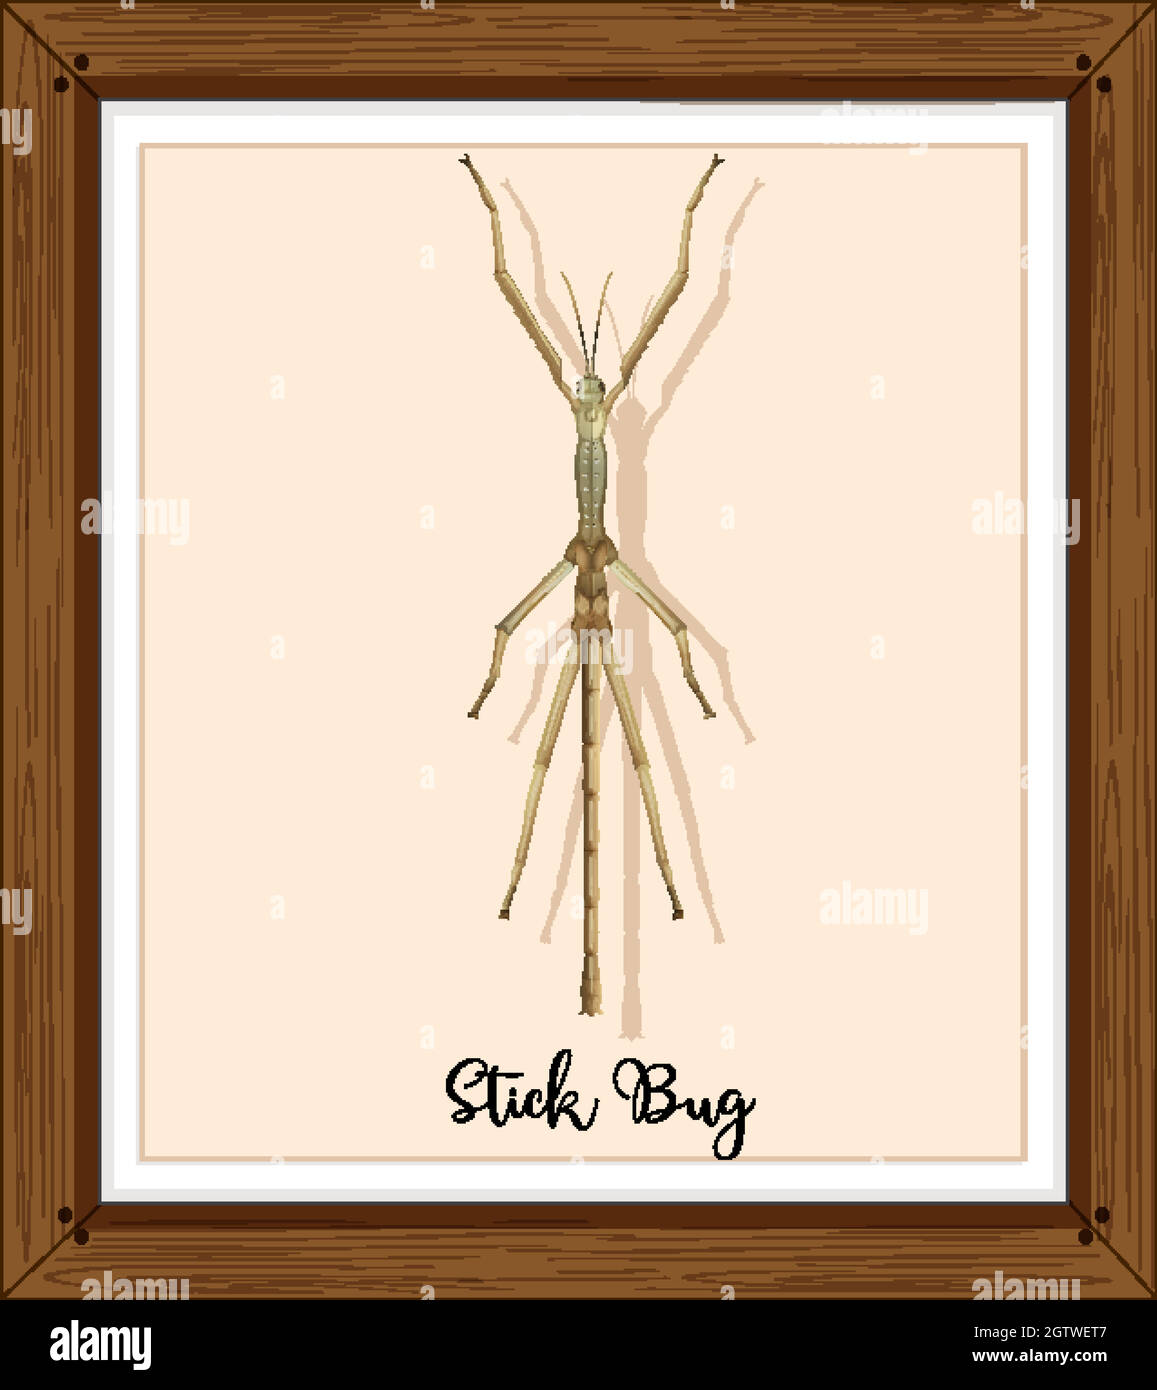 Stick bug on wooden frame Stock Vector